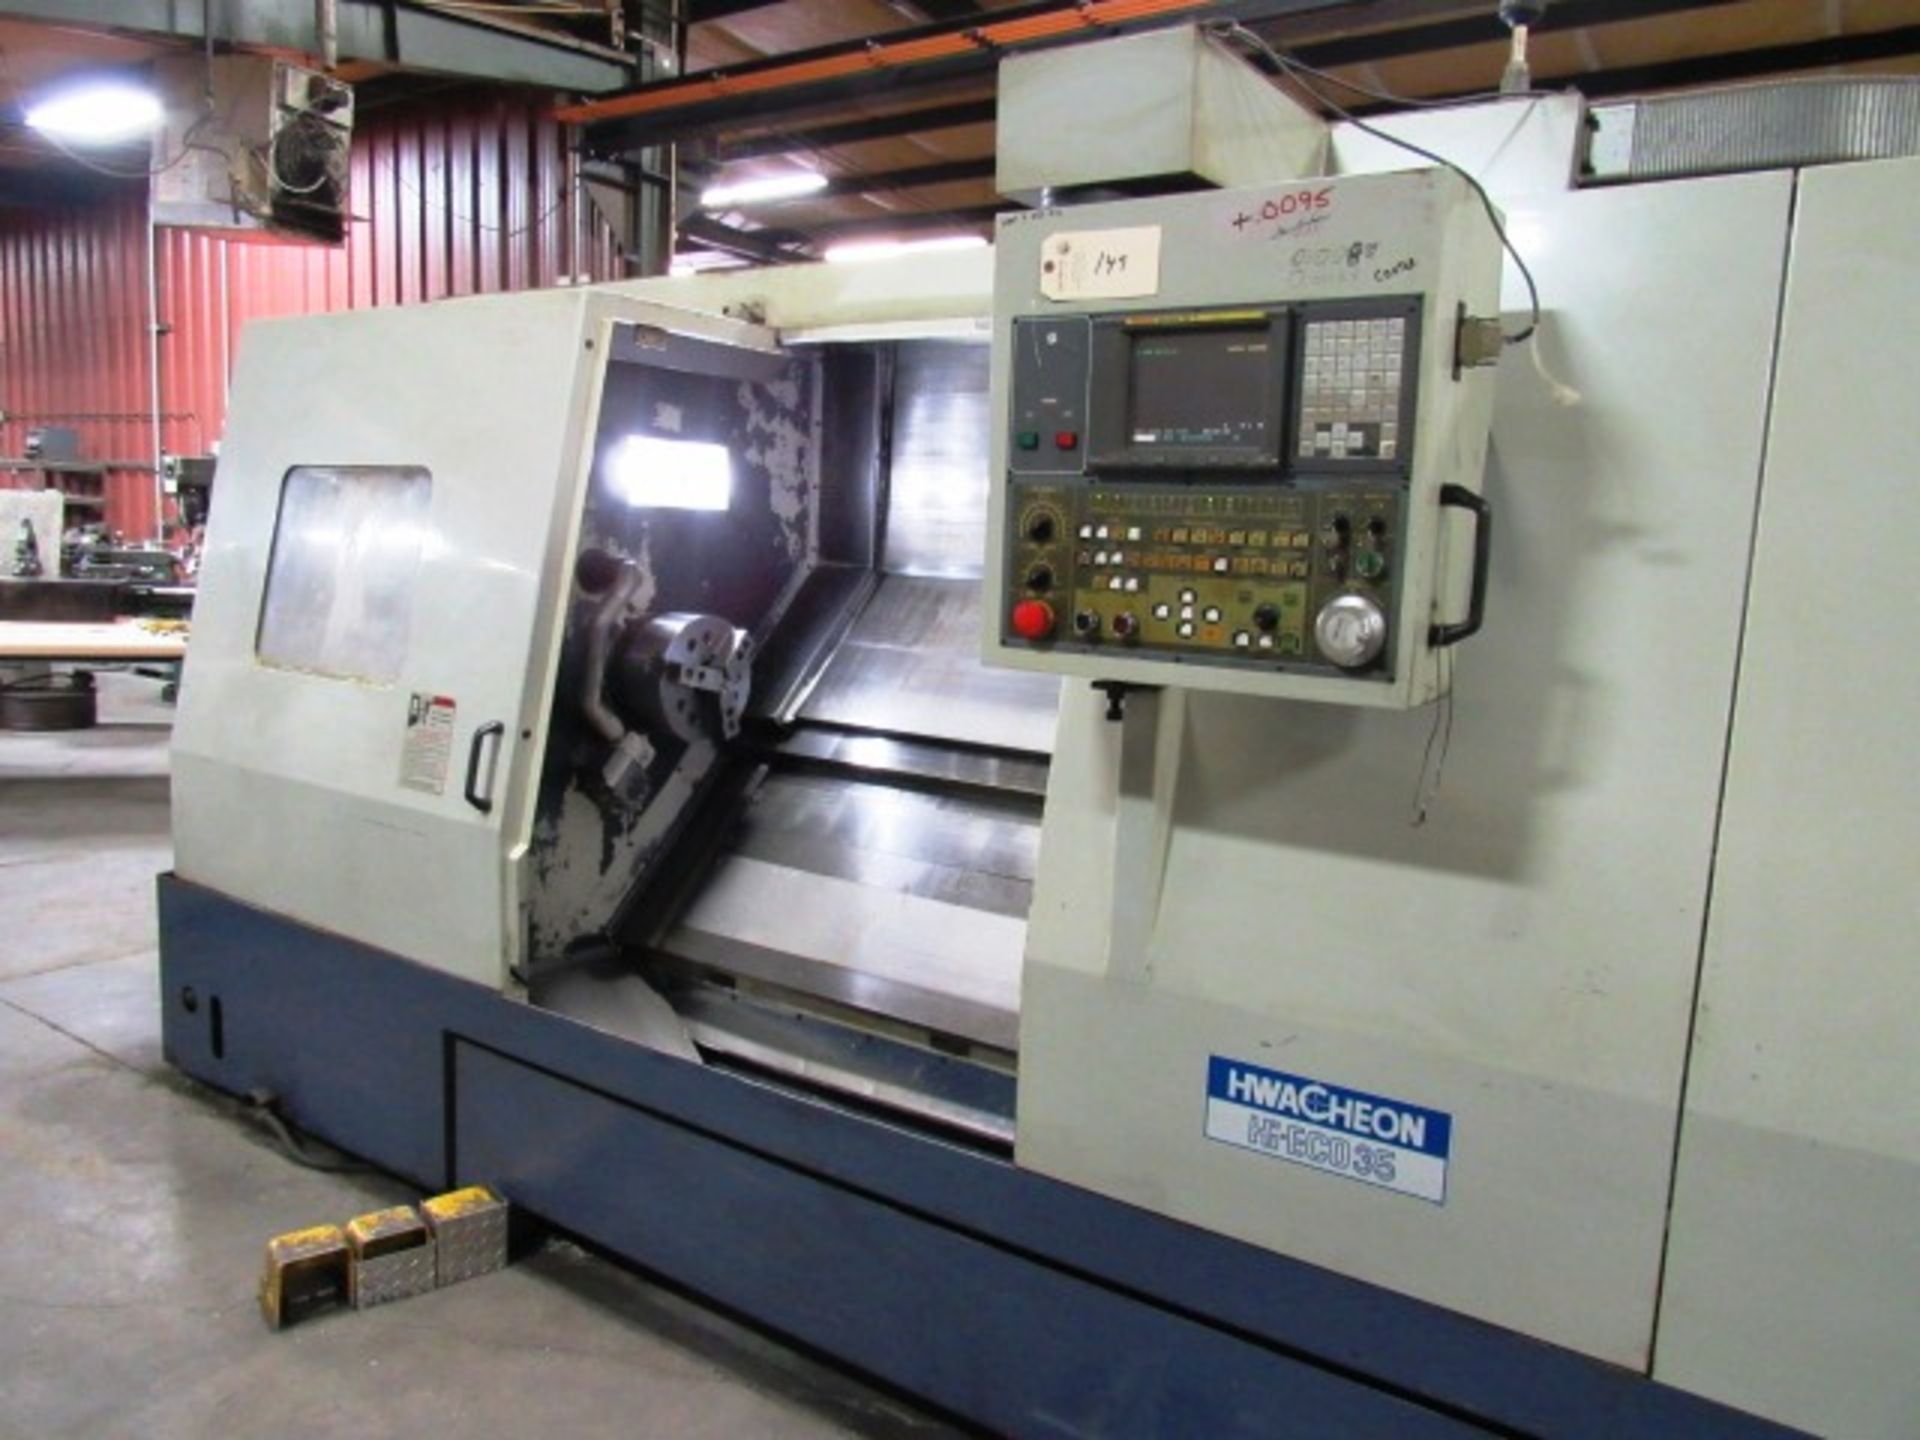 Hwacheon Hi-ECO 35 CNC Turning Center with 12'' 3-Jaw Chuck, 10 Position Turret, Approx. 4'' Bore, - Image 4 of 7